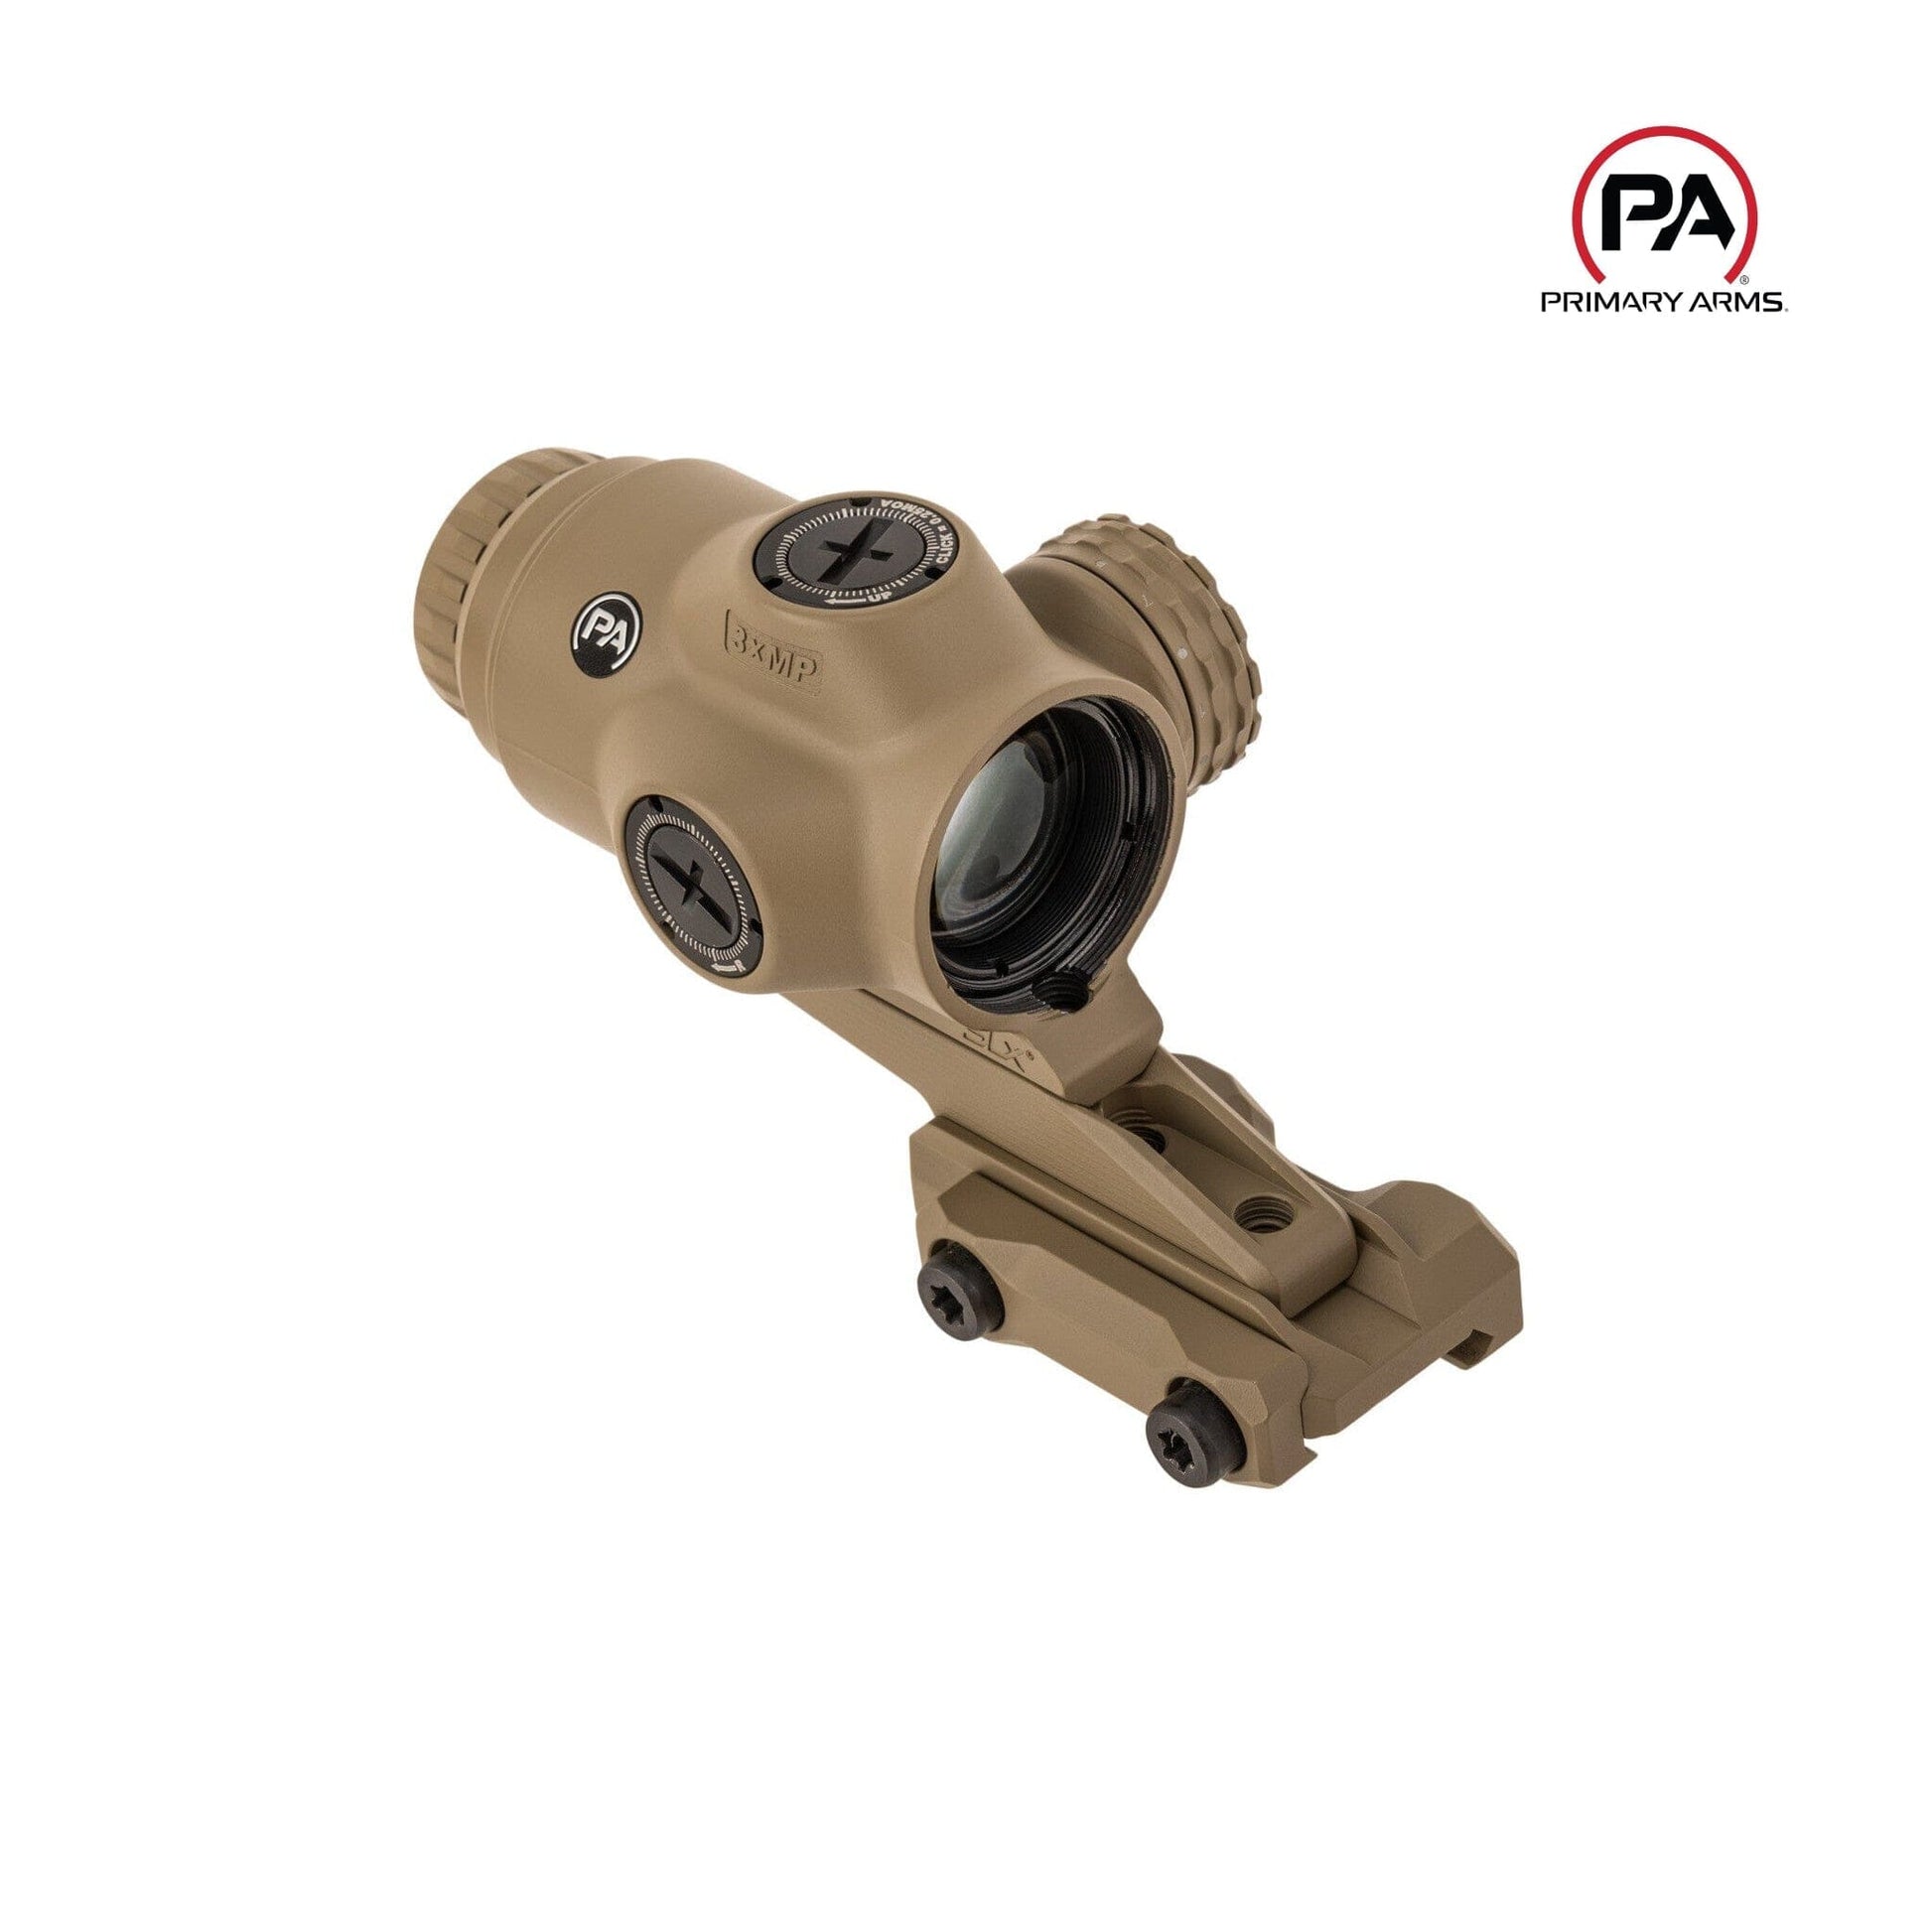 Primary Arms SLx 3x MicroPrism Sight - Red ACSS Raptor 7.62x39/.300 BLK - Yard Reticle - FDE Prism Rifle Scope Primary Arms 